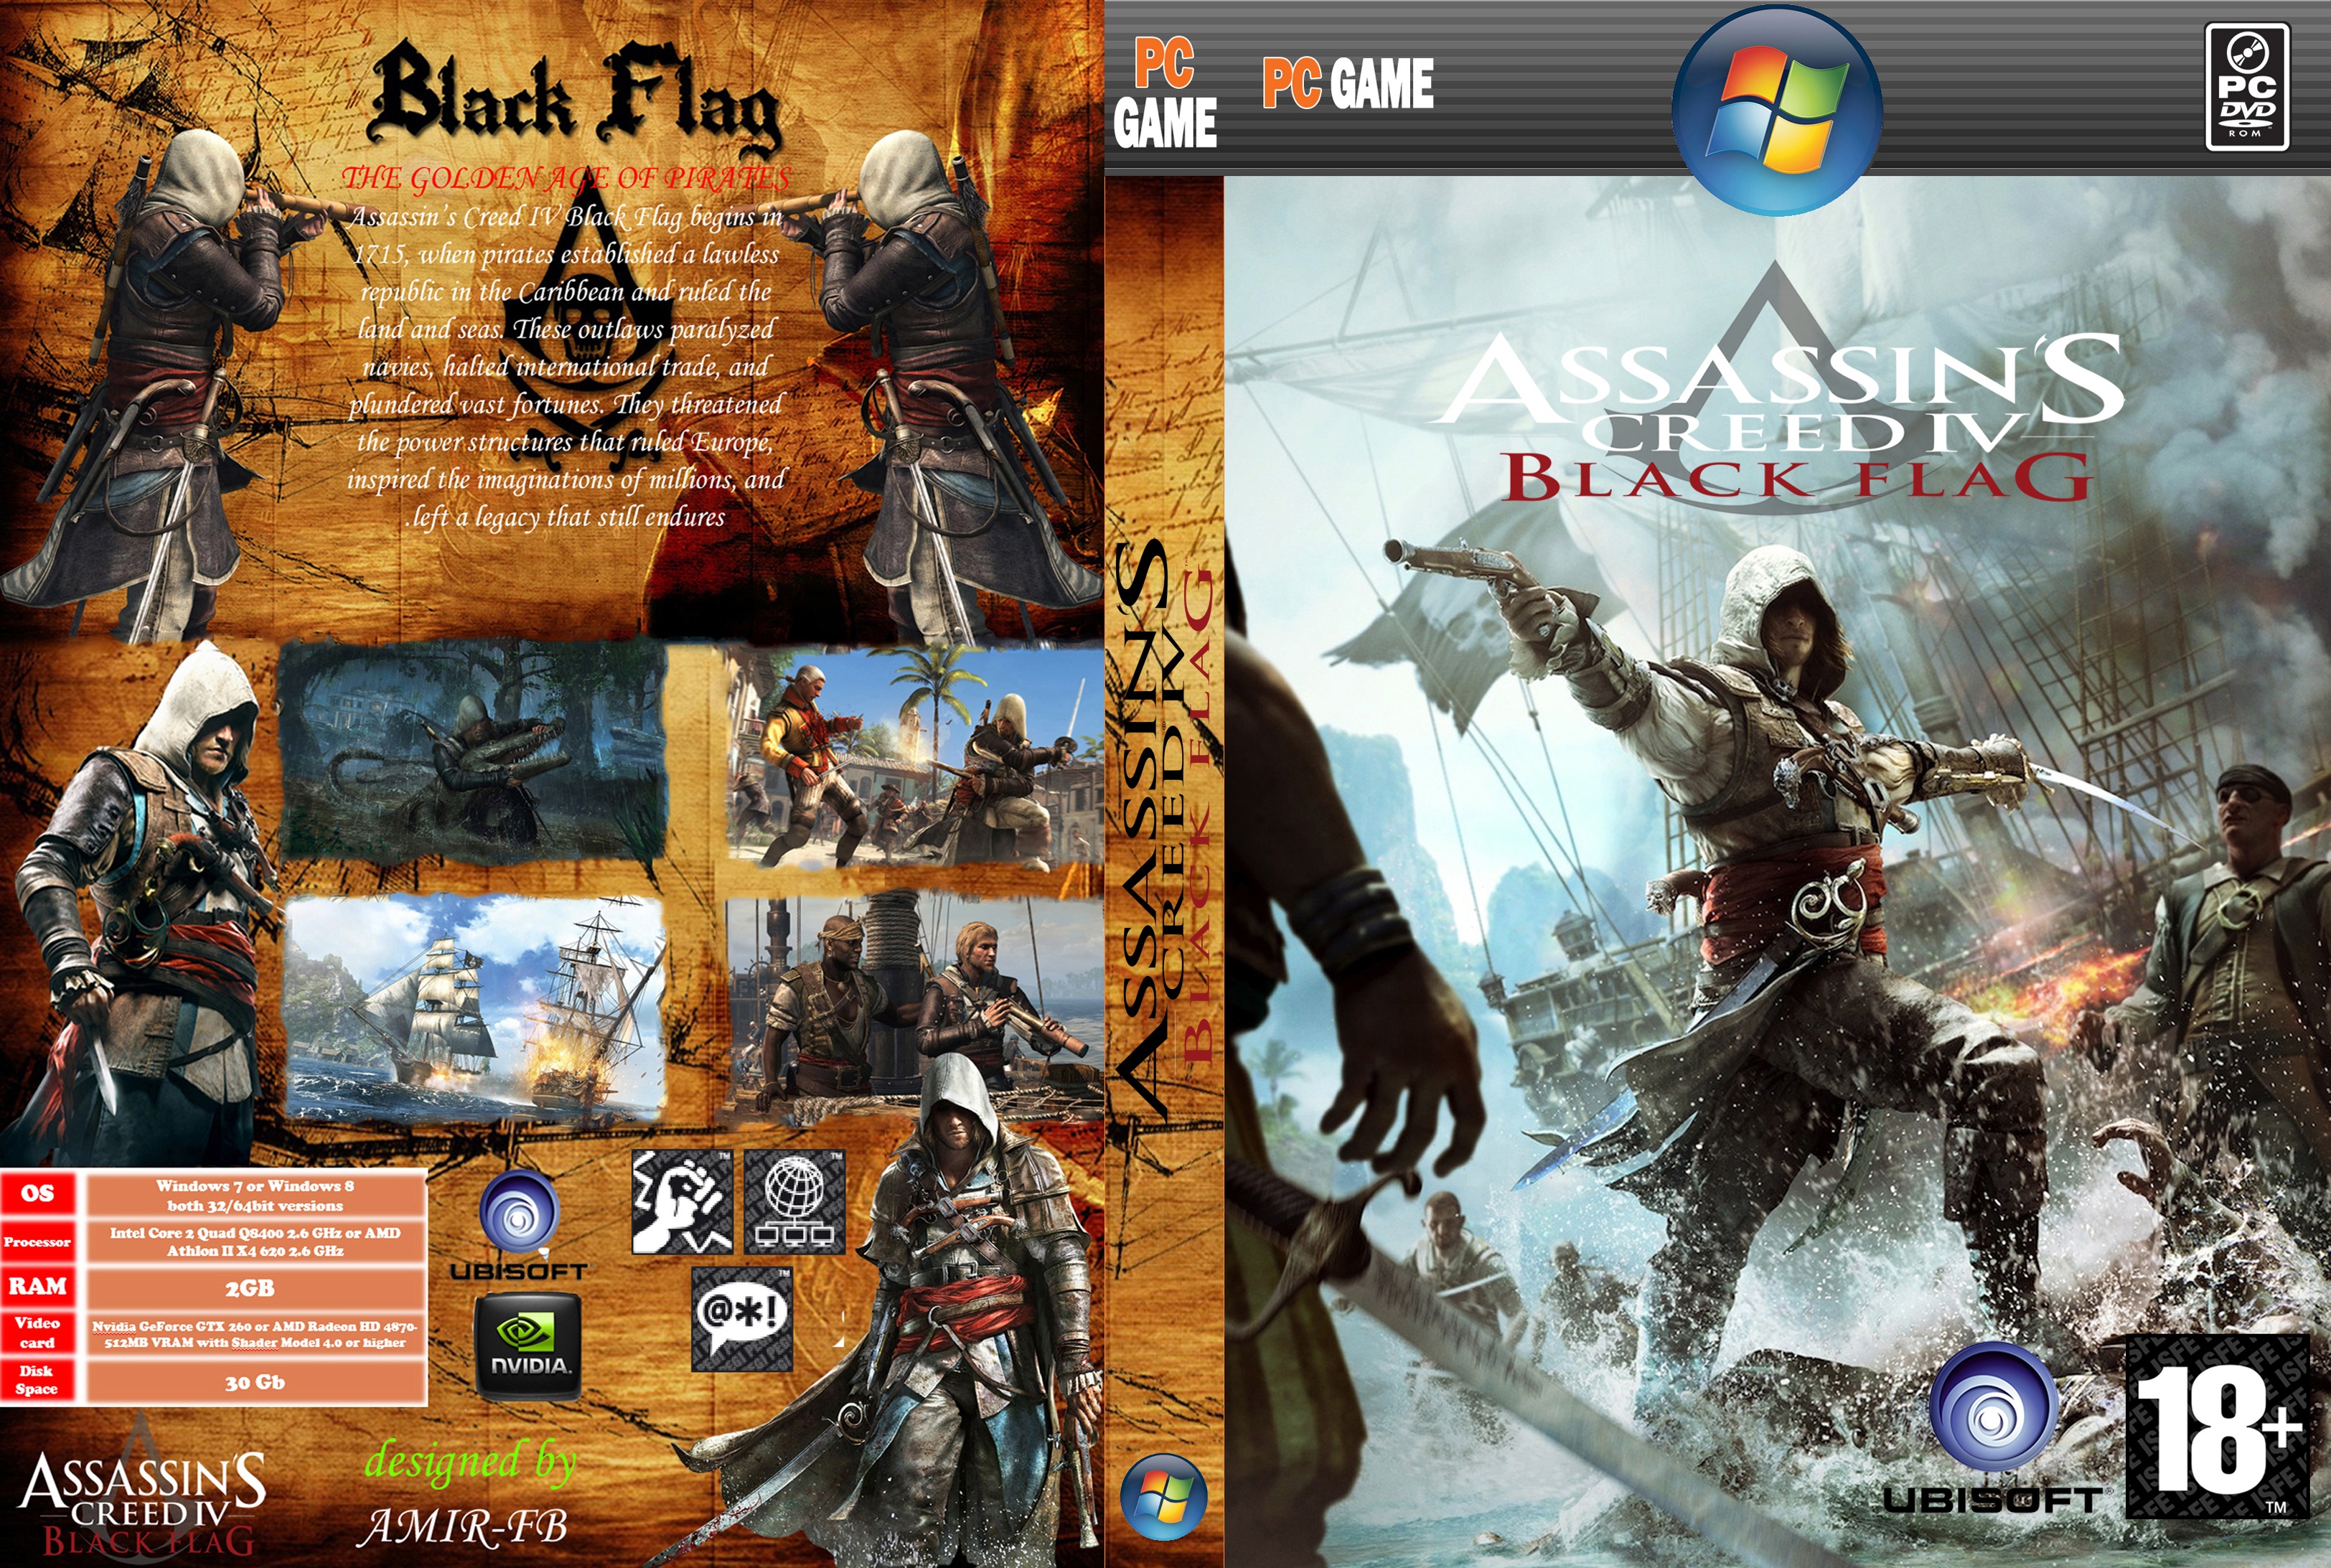 Assassin's Creed IV box cover